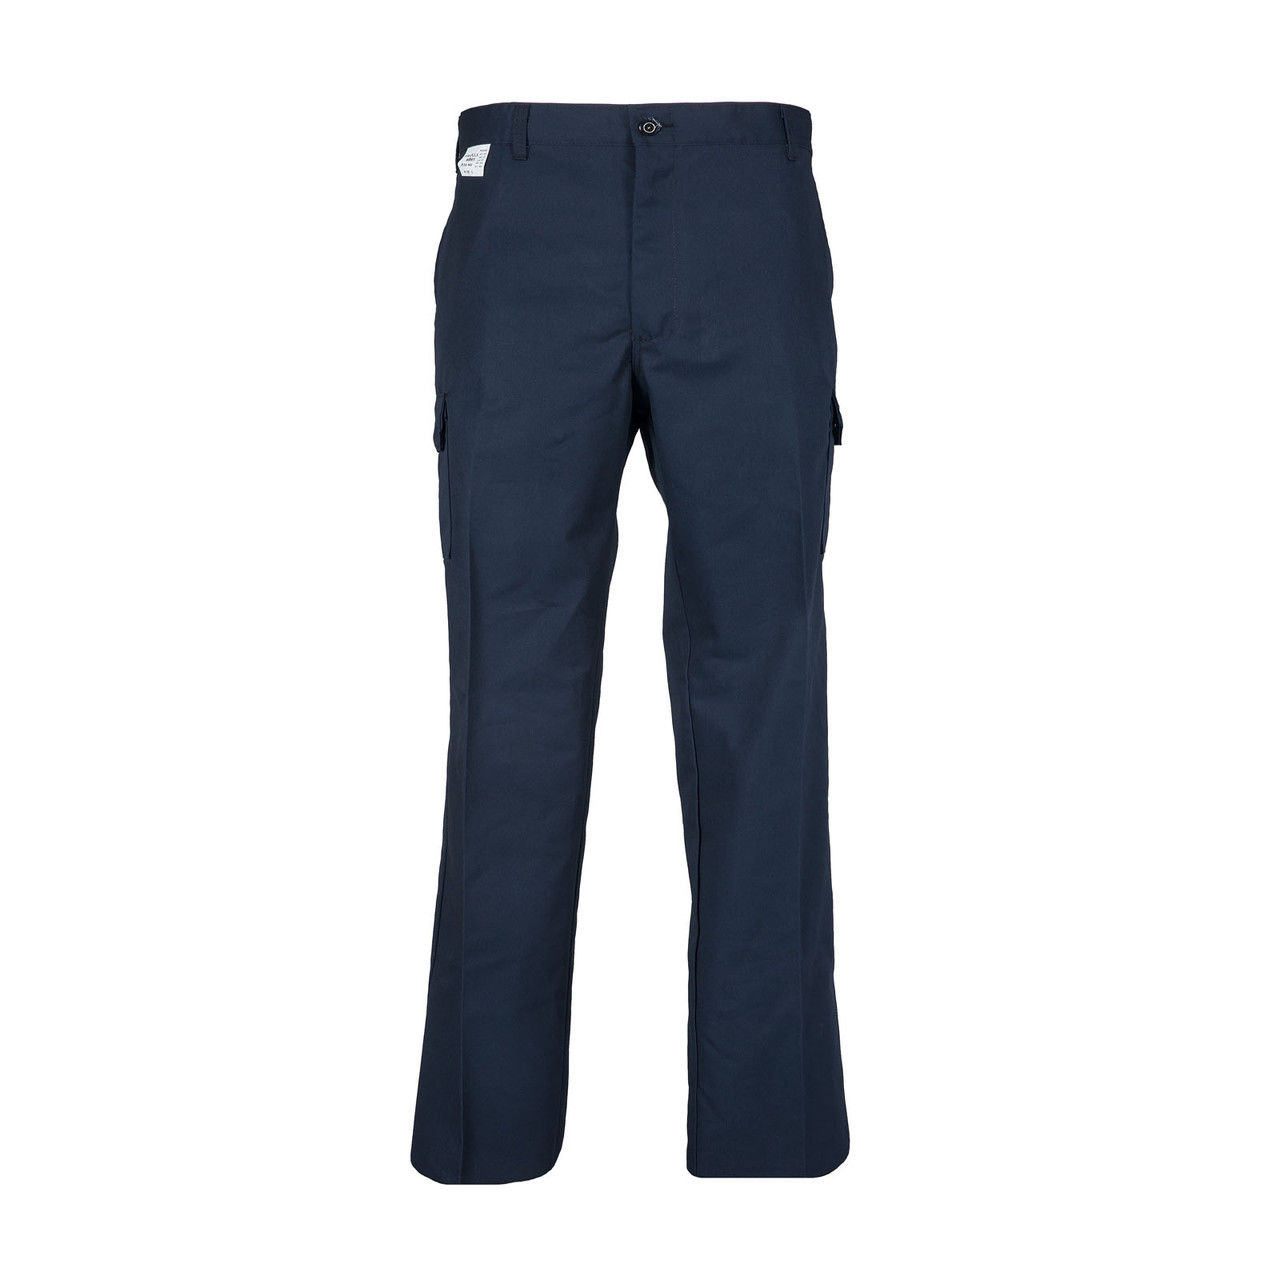 What colors go with navy pants?